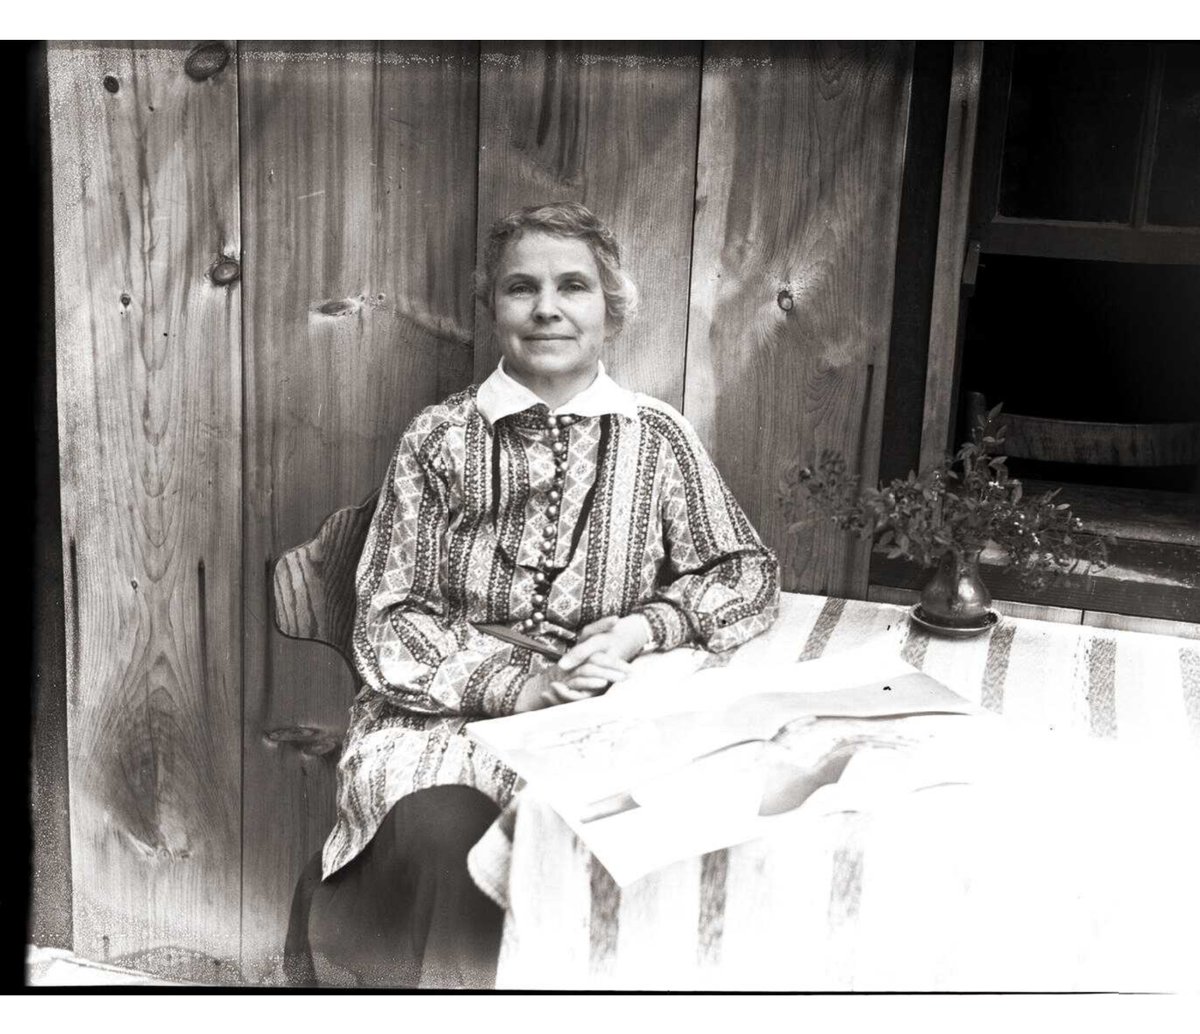 Dorothy Canfield Fisher died at home in Arlington, Vermont on 9 November 1958 from a stroke. Upon her death, Eleanor Roosevelt remarked: “Mrs. Fisher was a woman of great spiritual perception, and for many years it has given me comfort.”